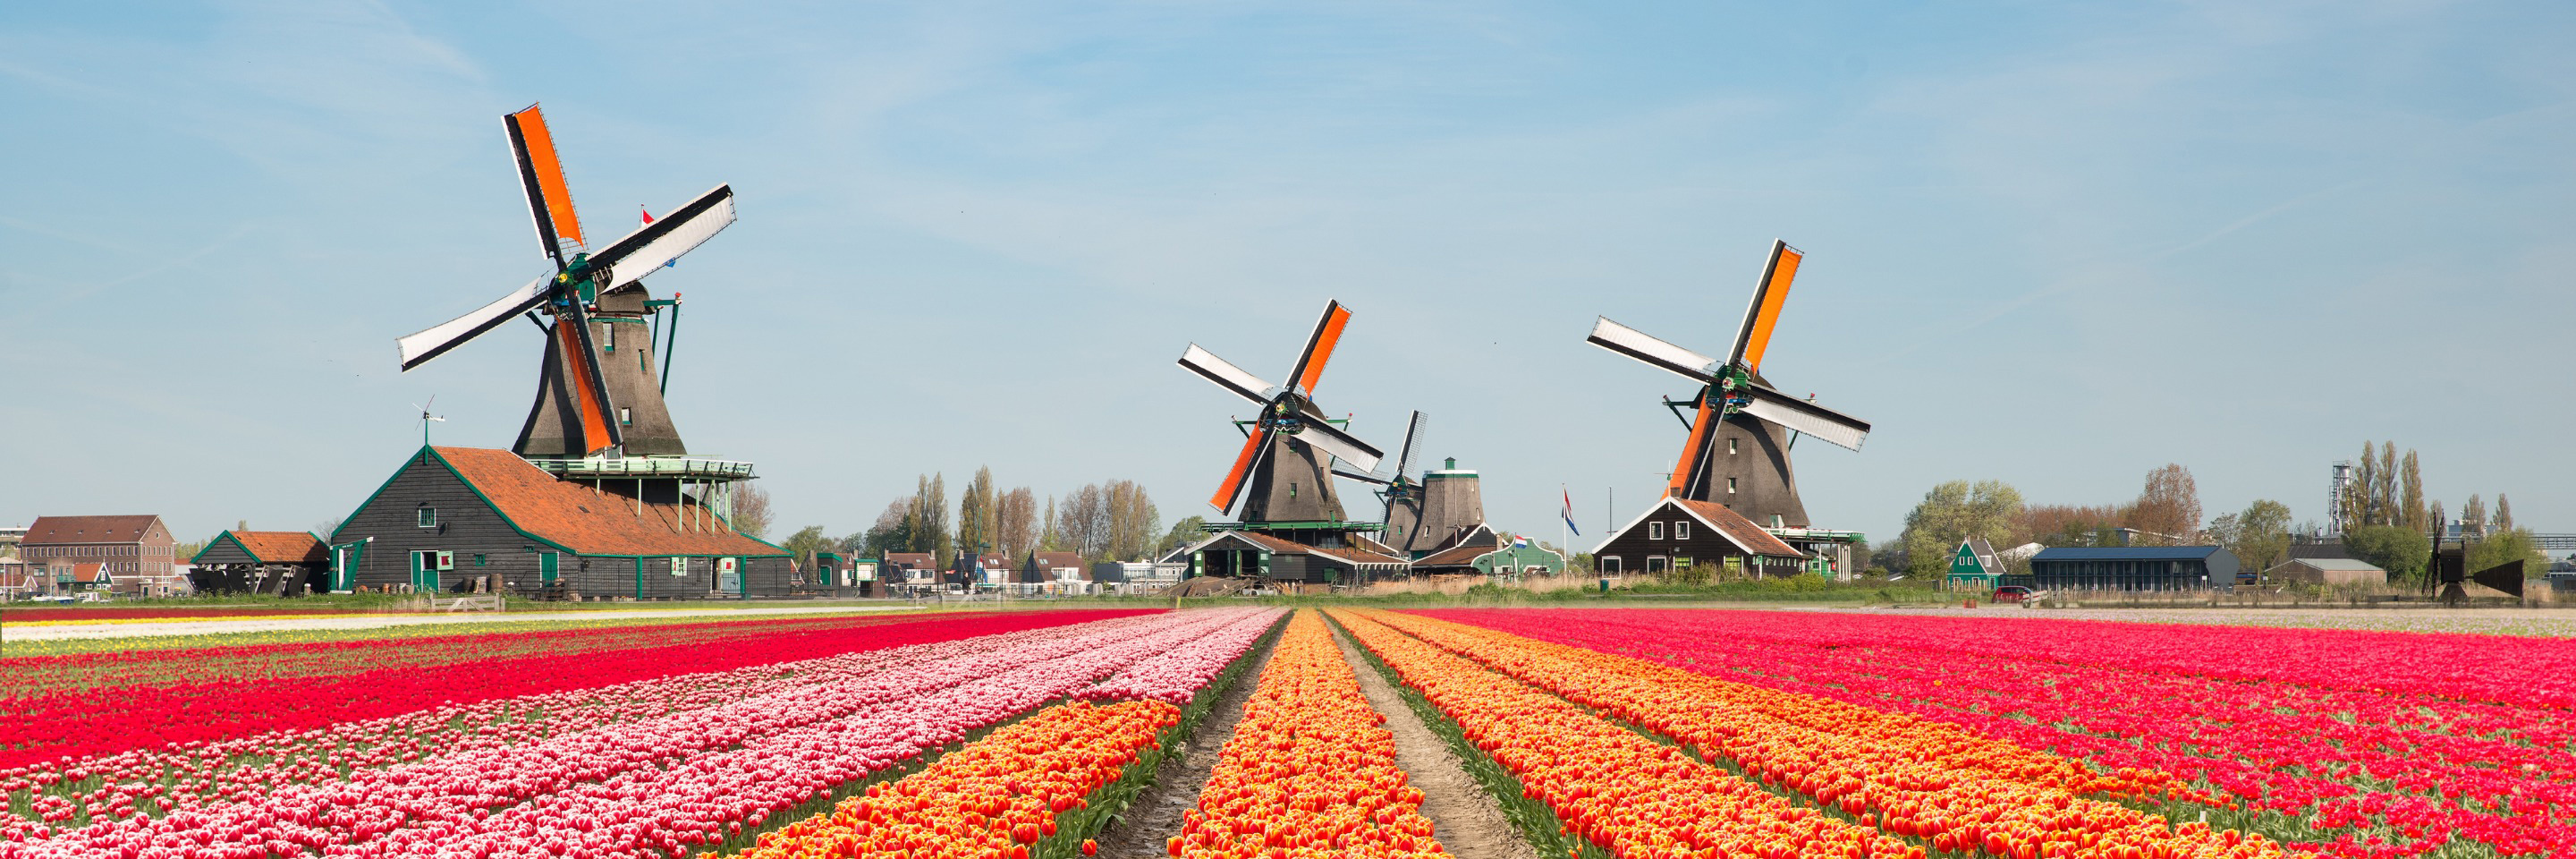 <p>Tulips of Northern Holland for Garden &amp; Nature Lovers.</p>
